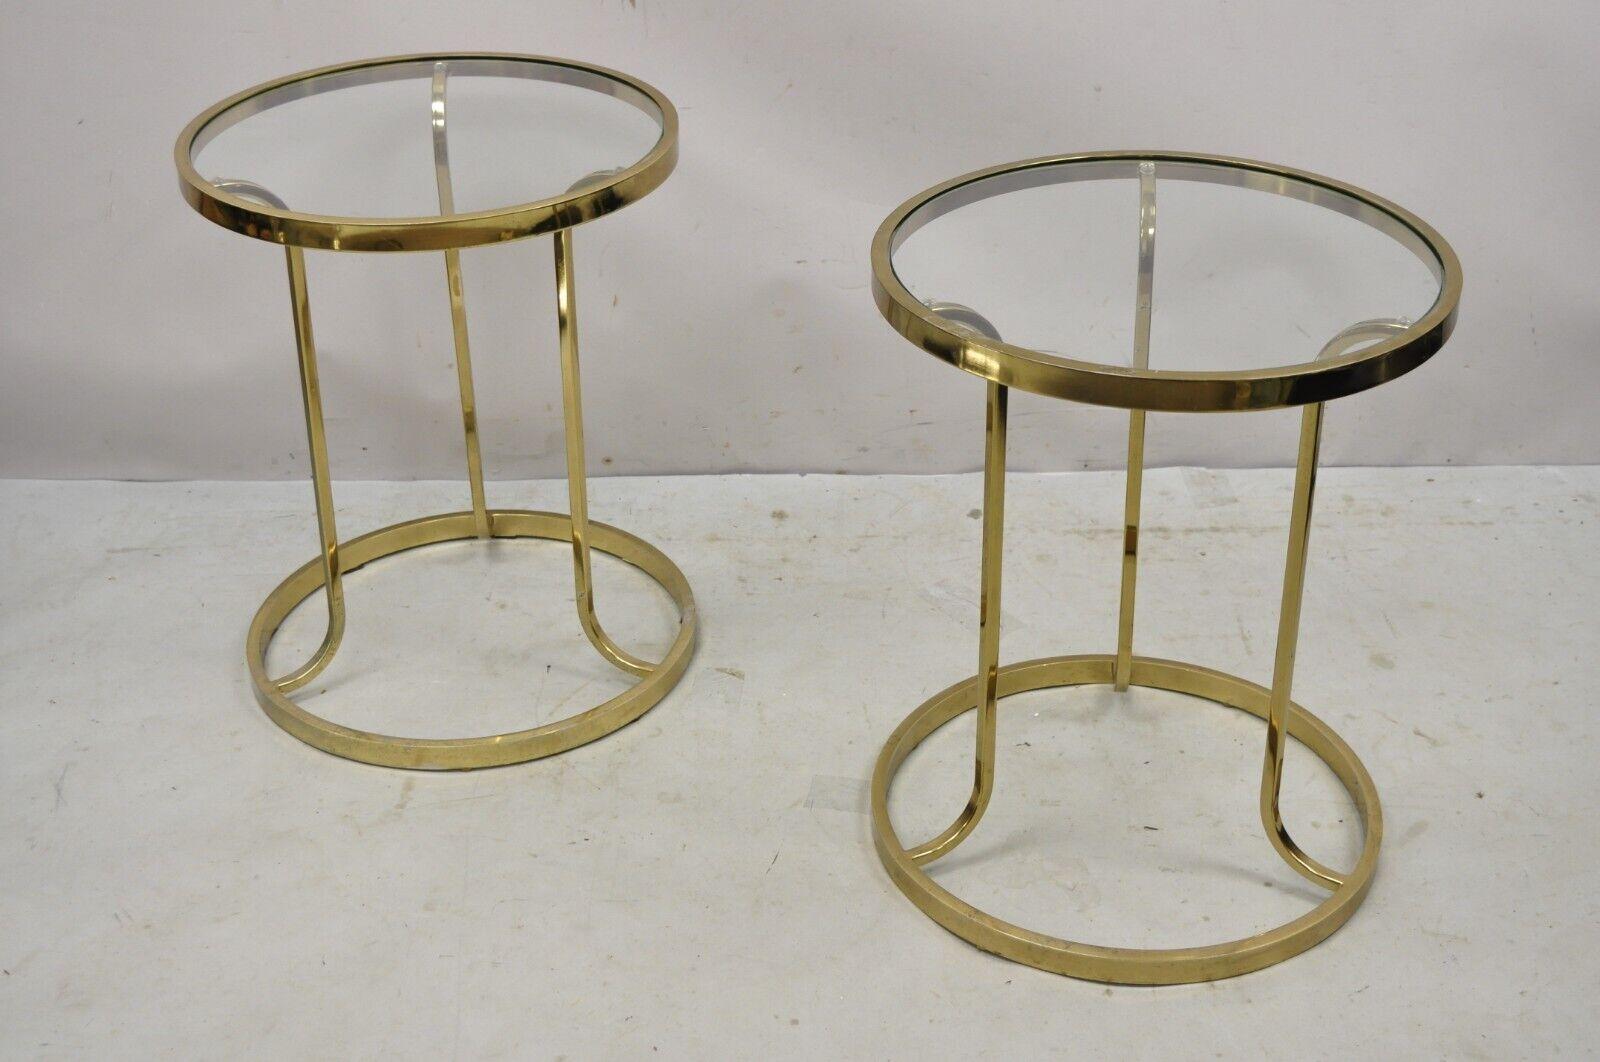 Vintage midcentury gold brass metal baughman style round side tables - a pair. Item features a sculptural metal base, round inset glass top, very nice vintage pair, clean modernist lines, great style and form. circa late 20th century. Measurements: